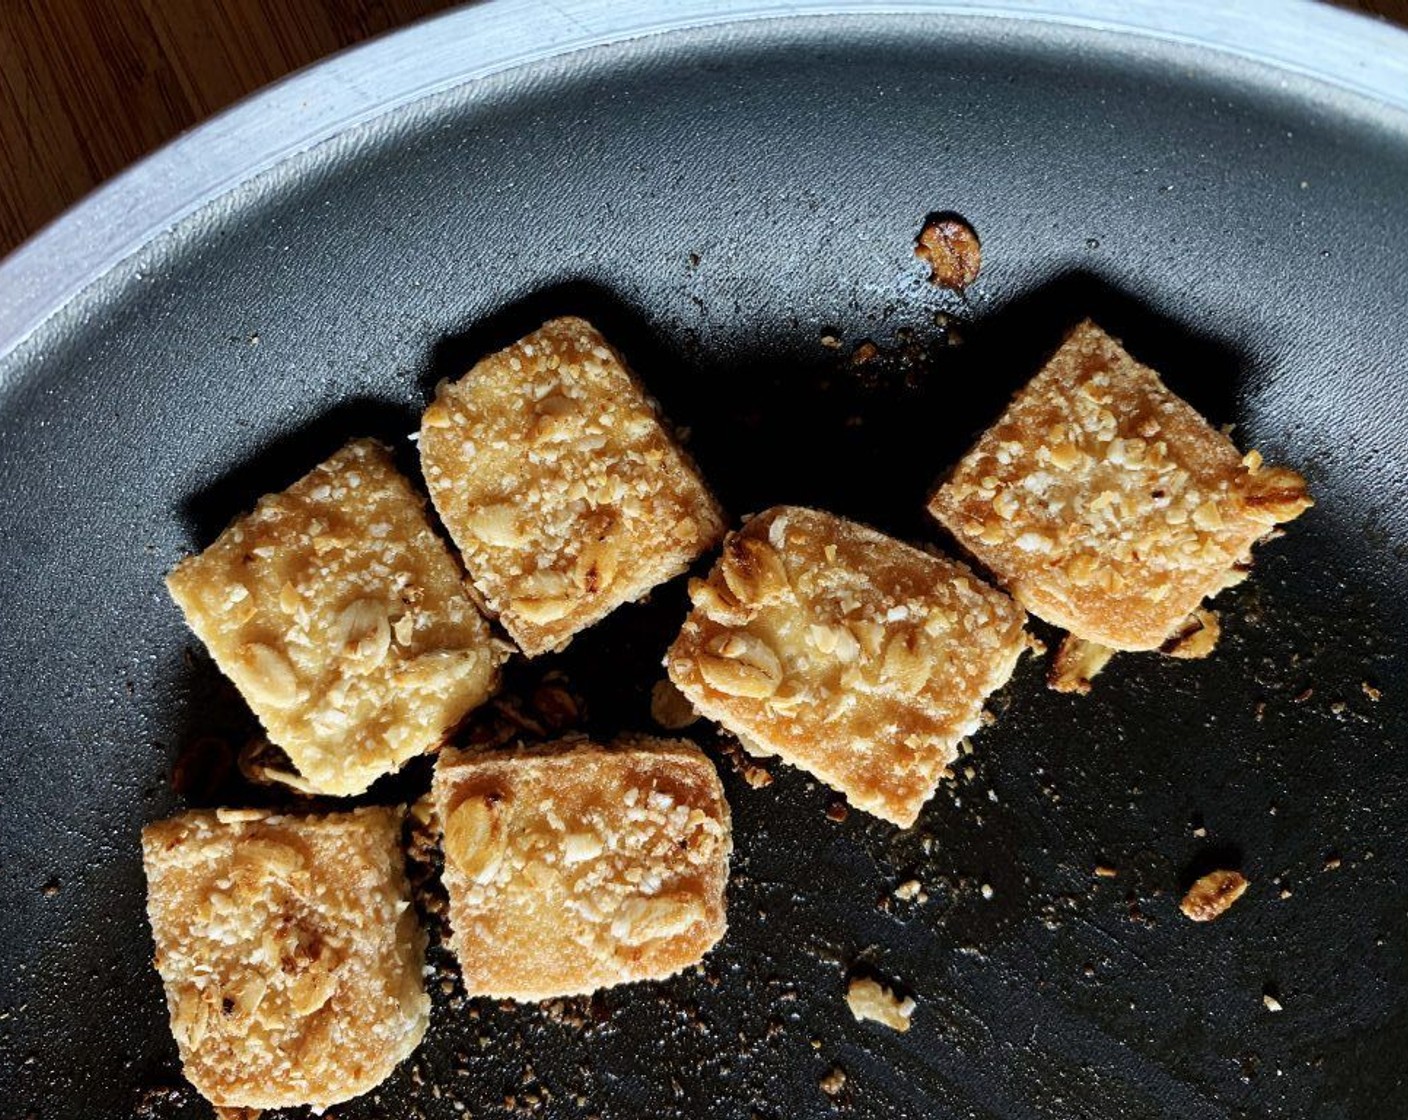 step 6 Heat up Coconut Oil (1 Tbsp) in a skillet. Once hot, cook the tofu on each side until crispy and golden-brown in color.